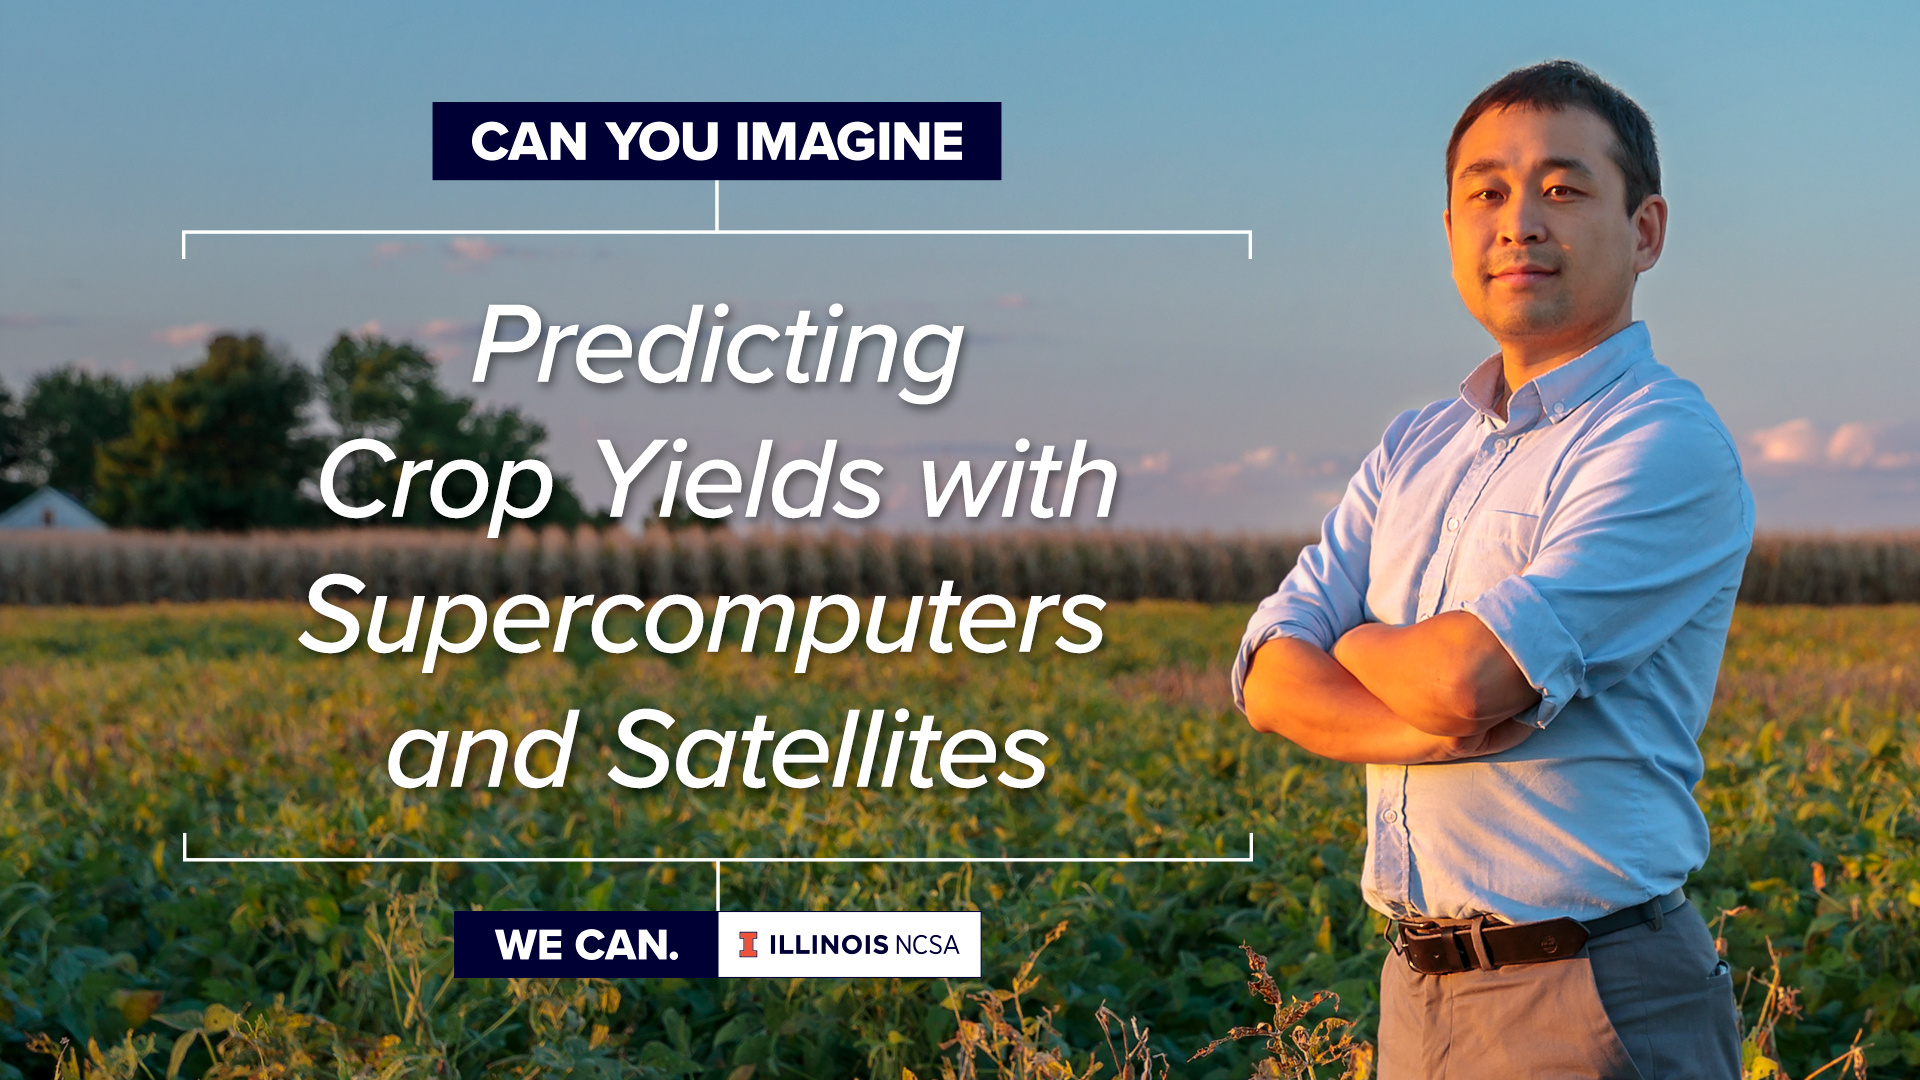 Can You Imagine: Predicting Crop Yields with Supercomputers and Satellites?